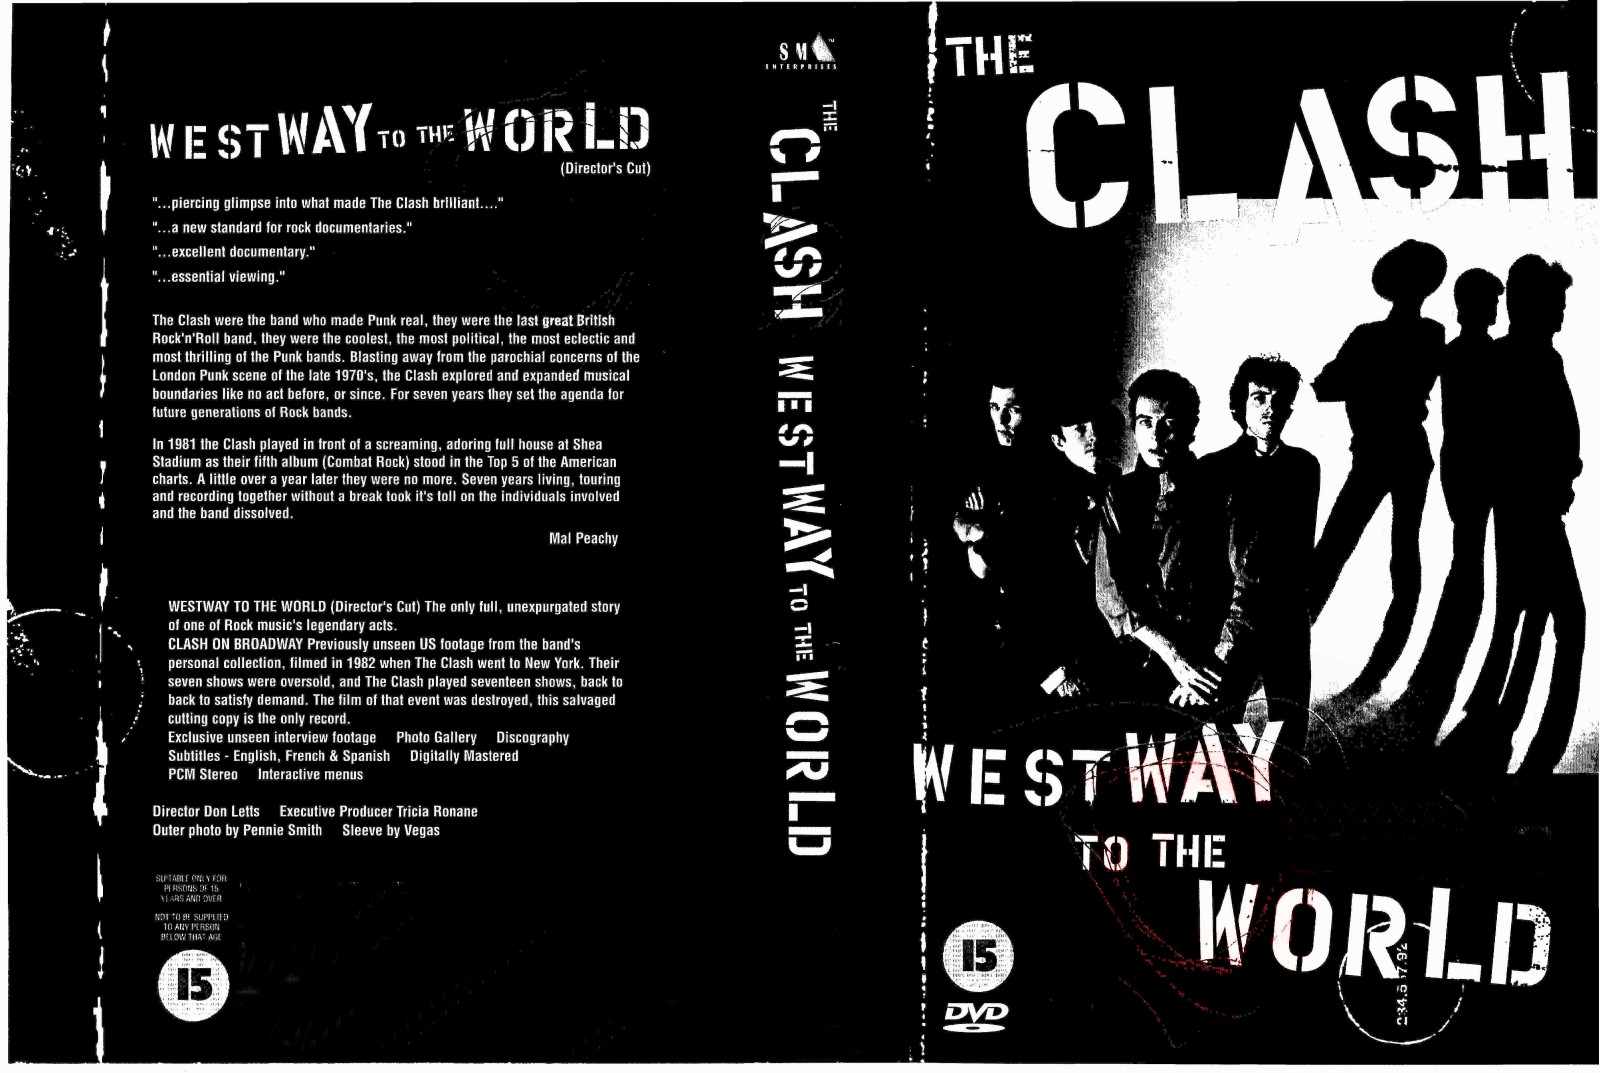 Jaquette DVD The clash - westway to the world